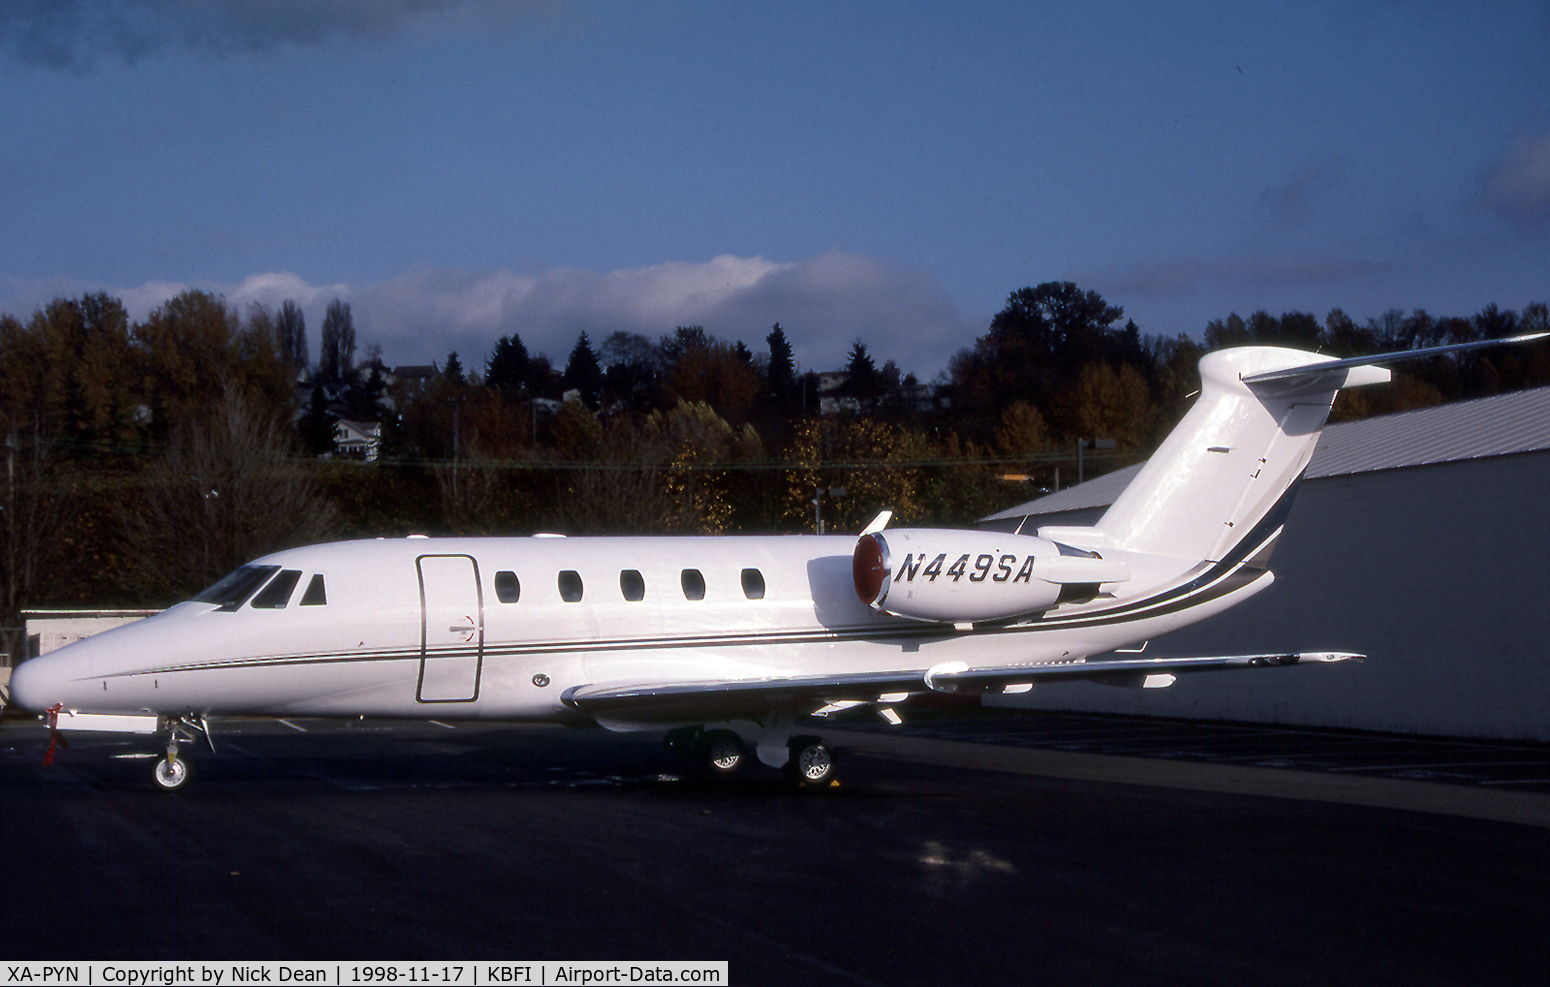 XA-PYN, 1998 Cessna 650 Citation VII C/N 650-7088, KBFI (Seen here as N449SA this airframe is currently registered XA-PYN as posted)